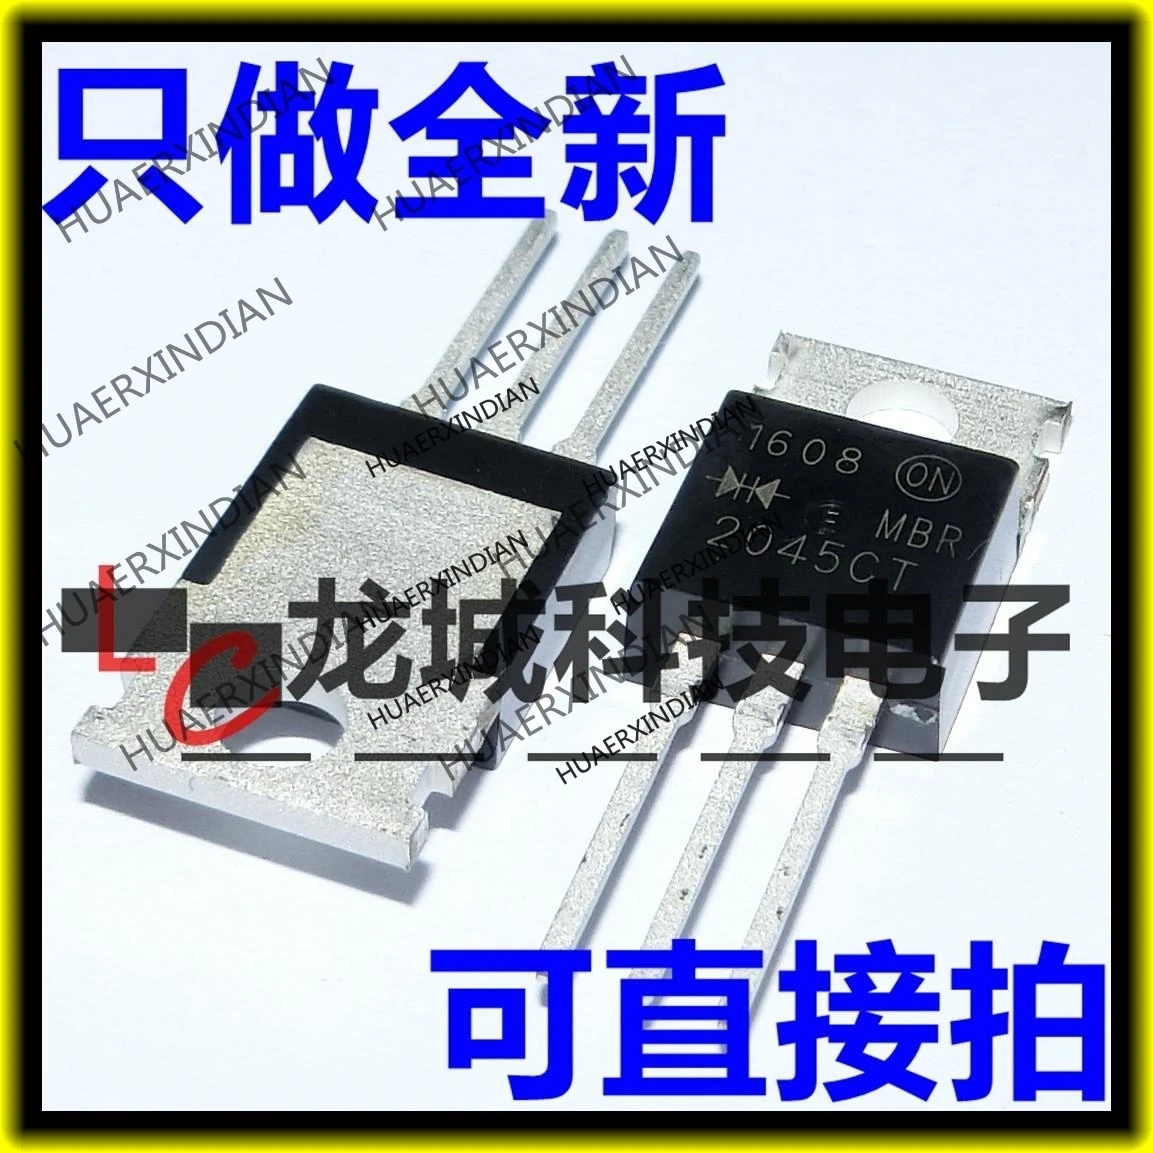 

10PCS/LOT NEW MBR2045CT TO-220 20A/45V in stock